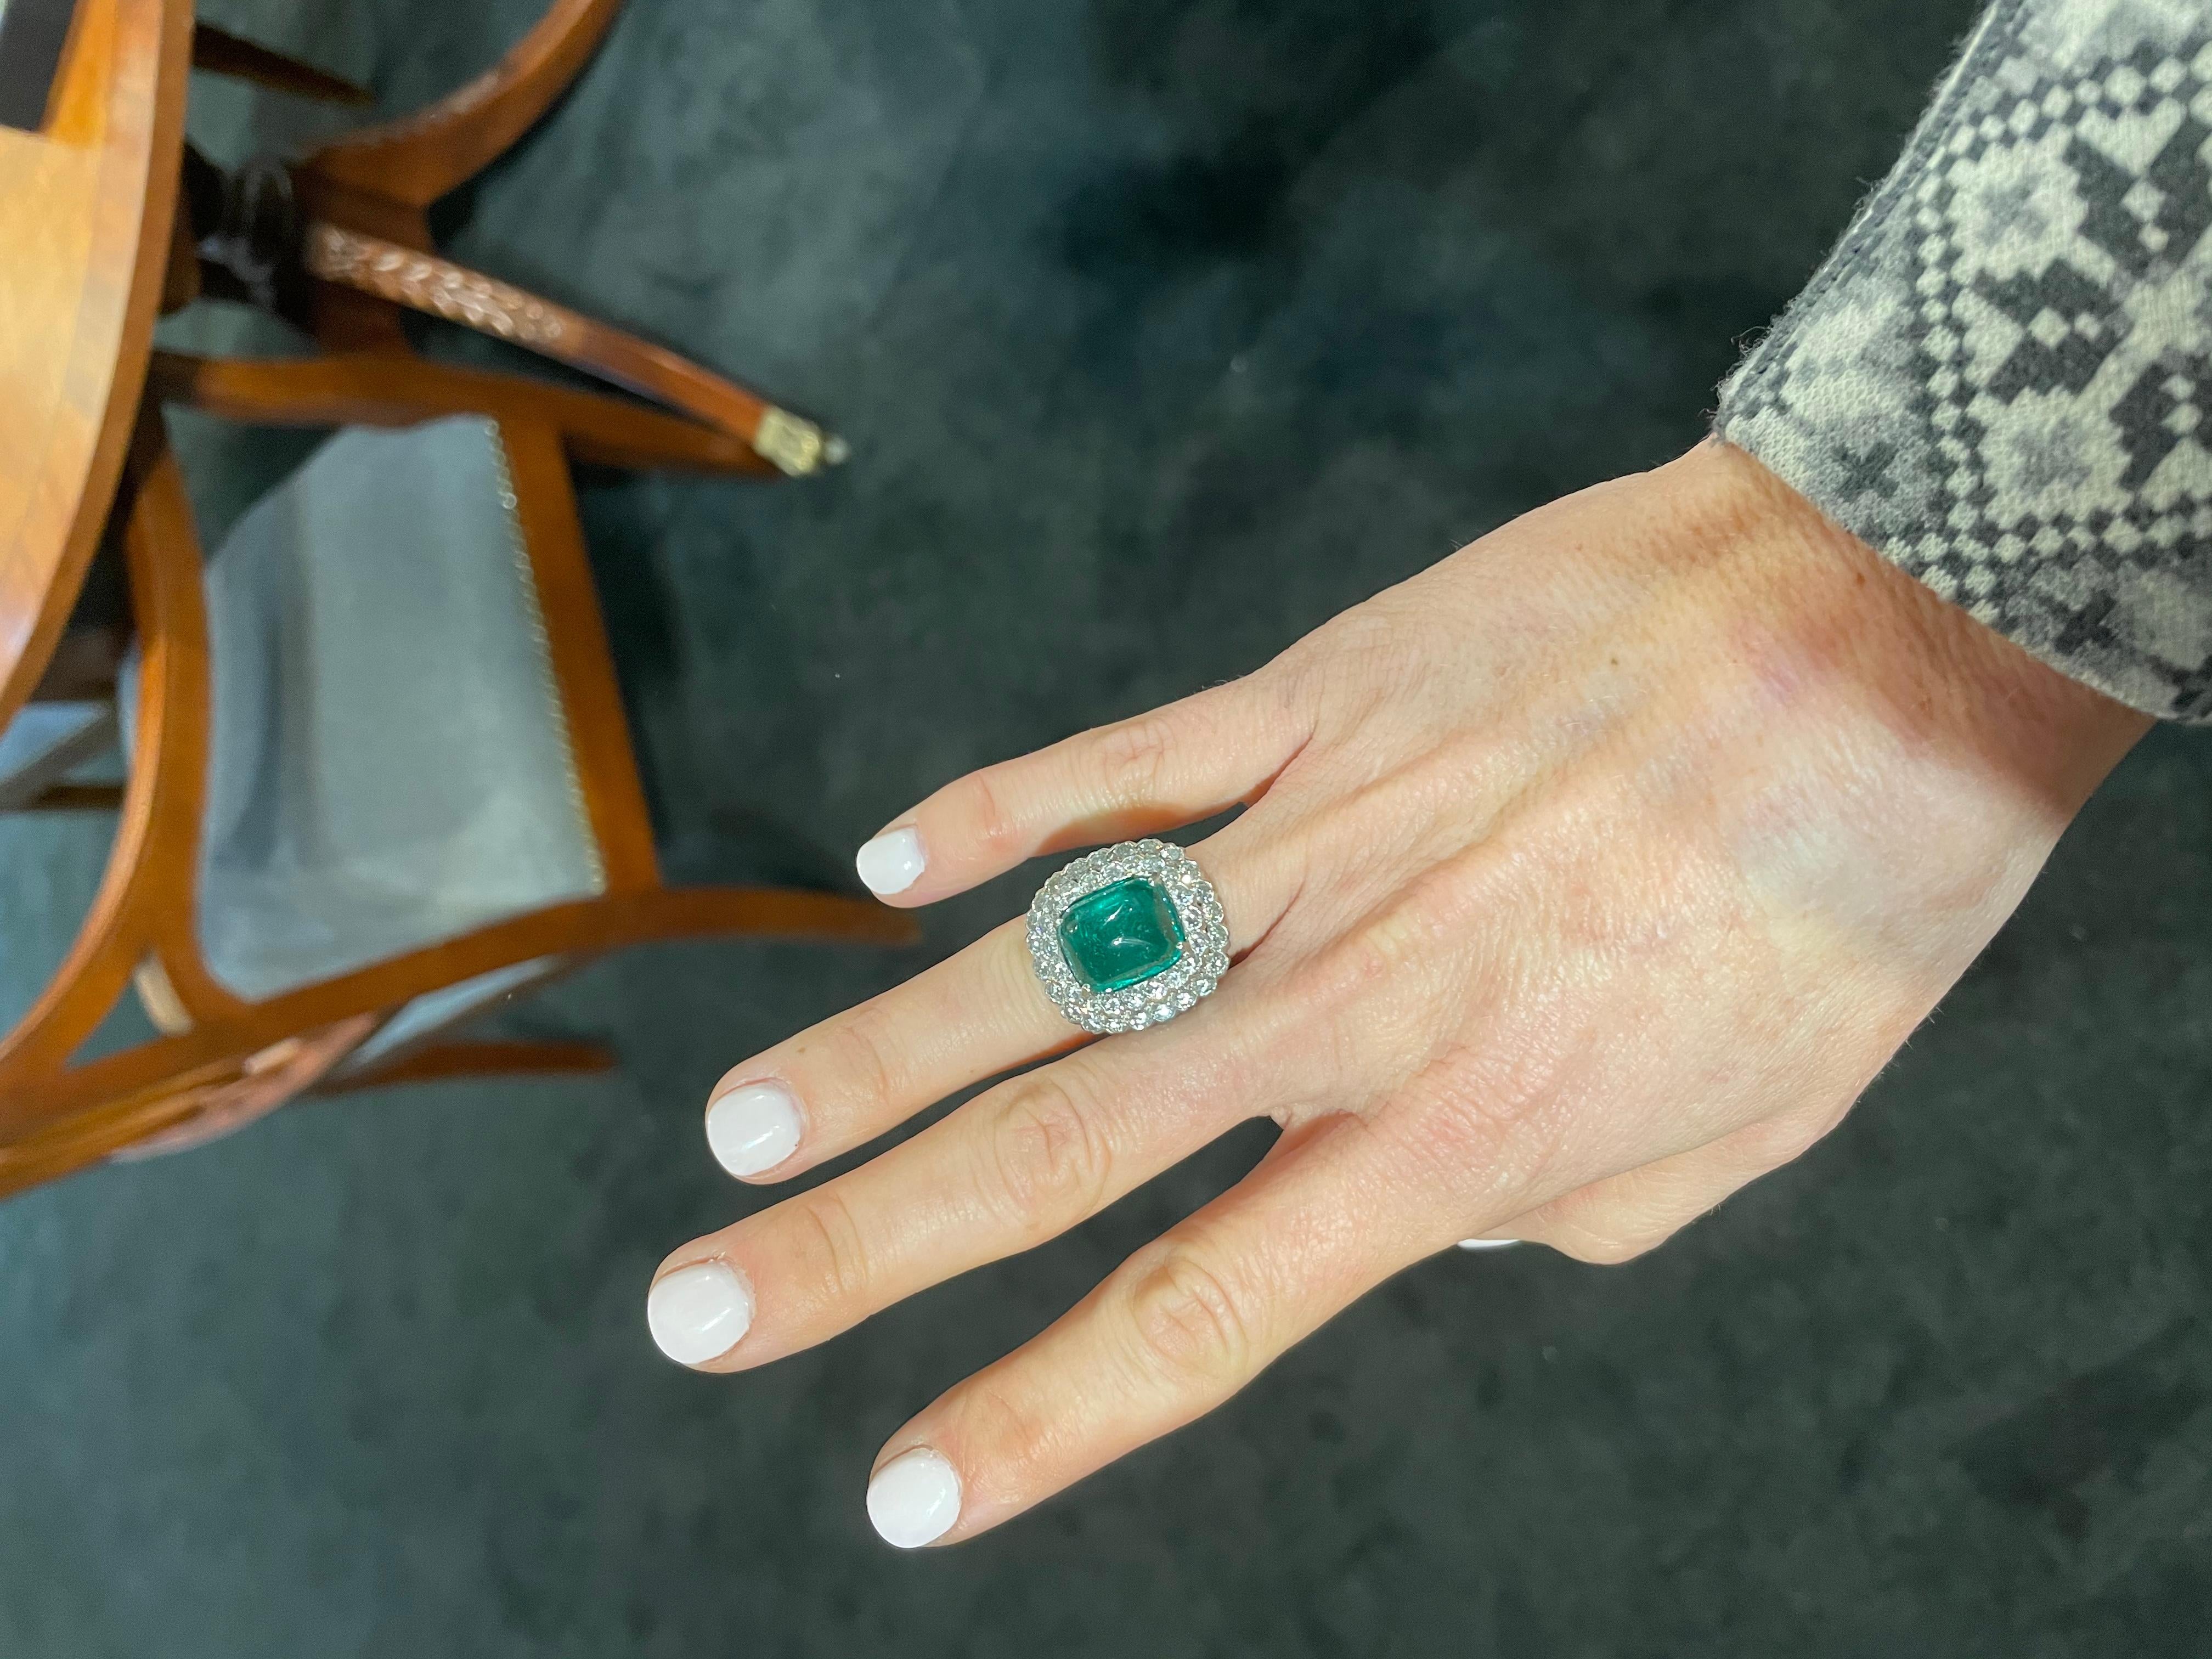 One of a kind William Ruser  7.40ct sugar-loaf Colombian emerald ring. The hand crafted platinum setting features wwiss- and round brilliant-cut diamonds with G/H color and VS clarity weighing 3.00 carats.

Accompanied by AGL Report No. 1098106,